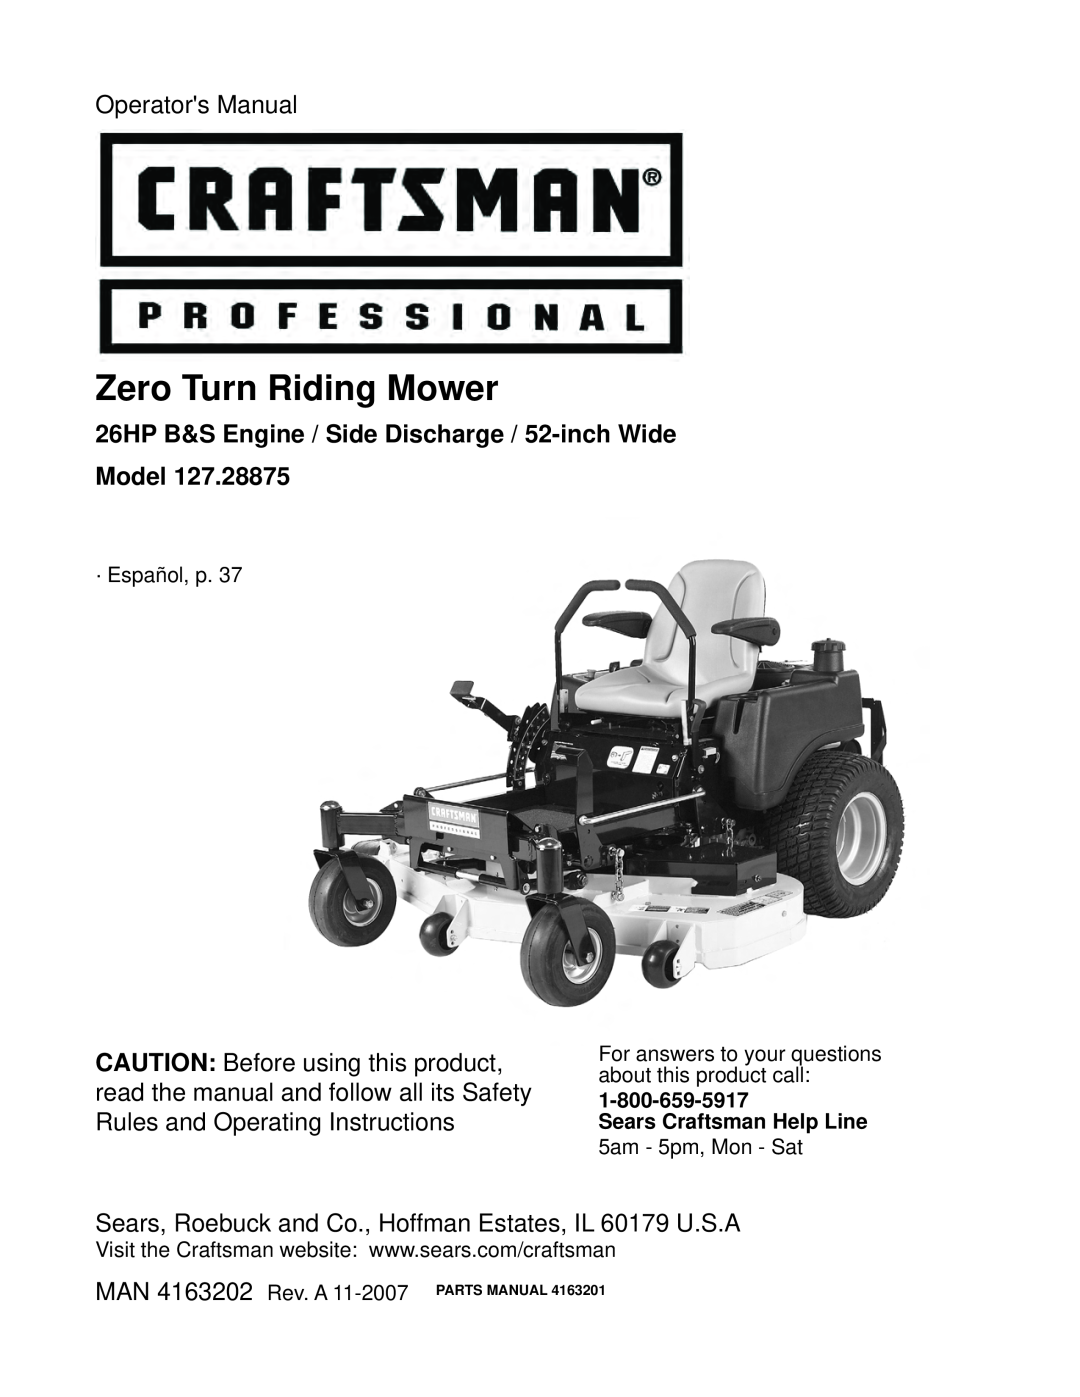 Craftsman 127.28875 manual 26HP B&S Engine / Side Discharge / 52-inch Wide Model, Zero Turn Riding Mower 